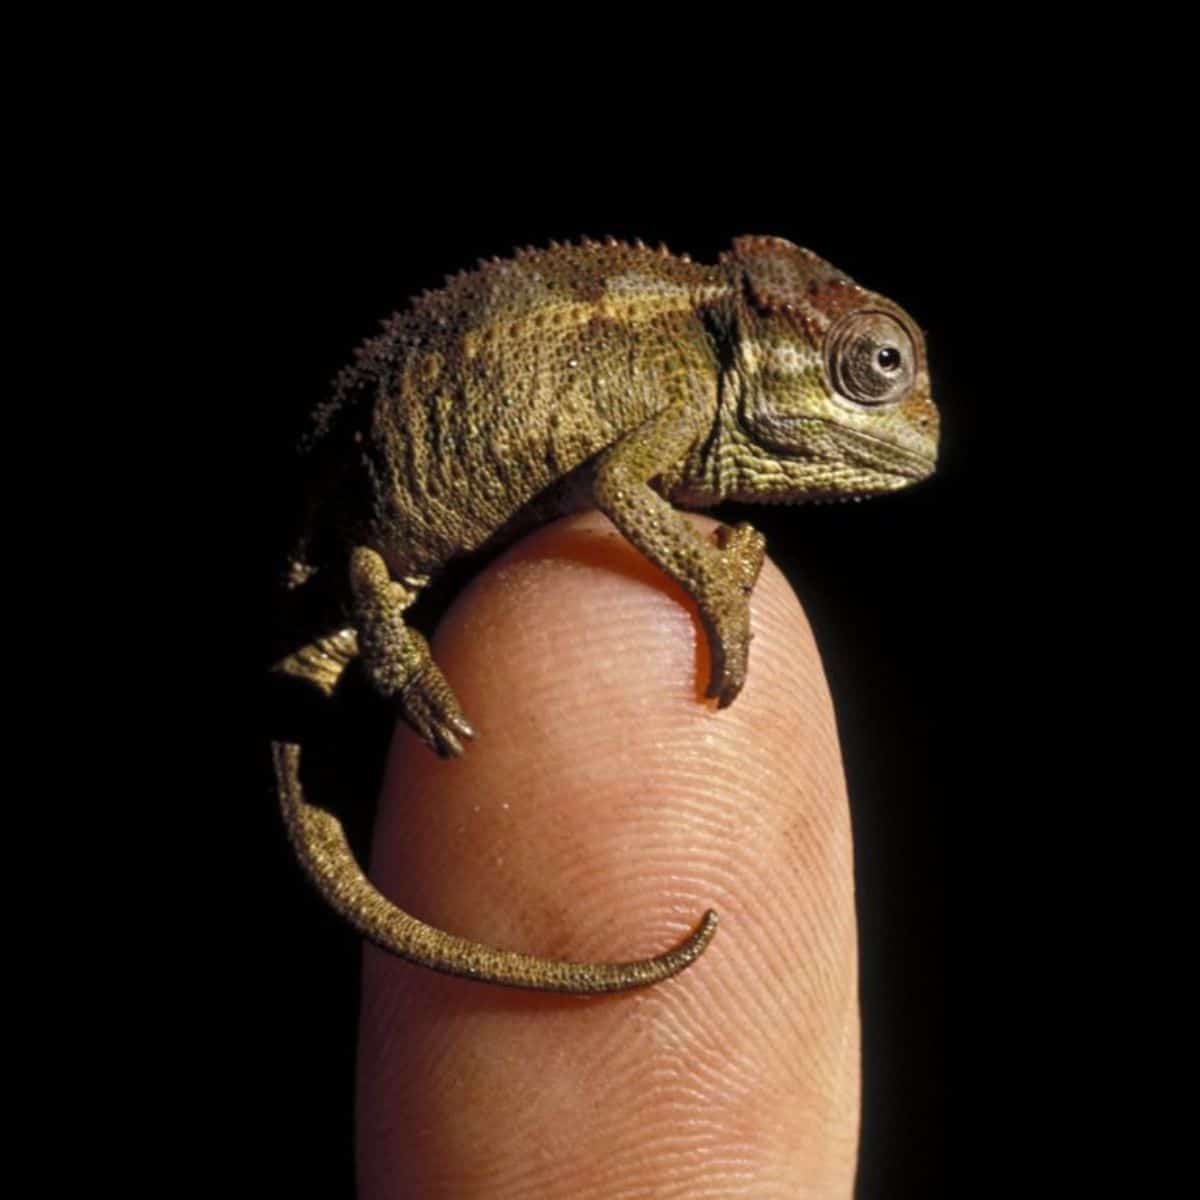 brown and white baby chameleon on someone's finger